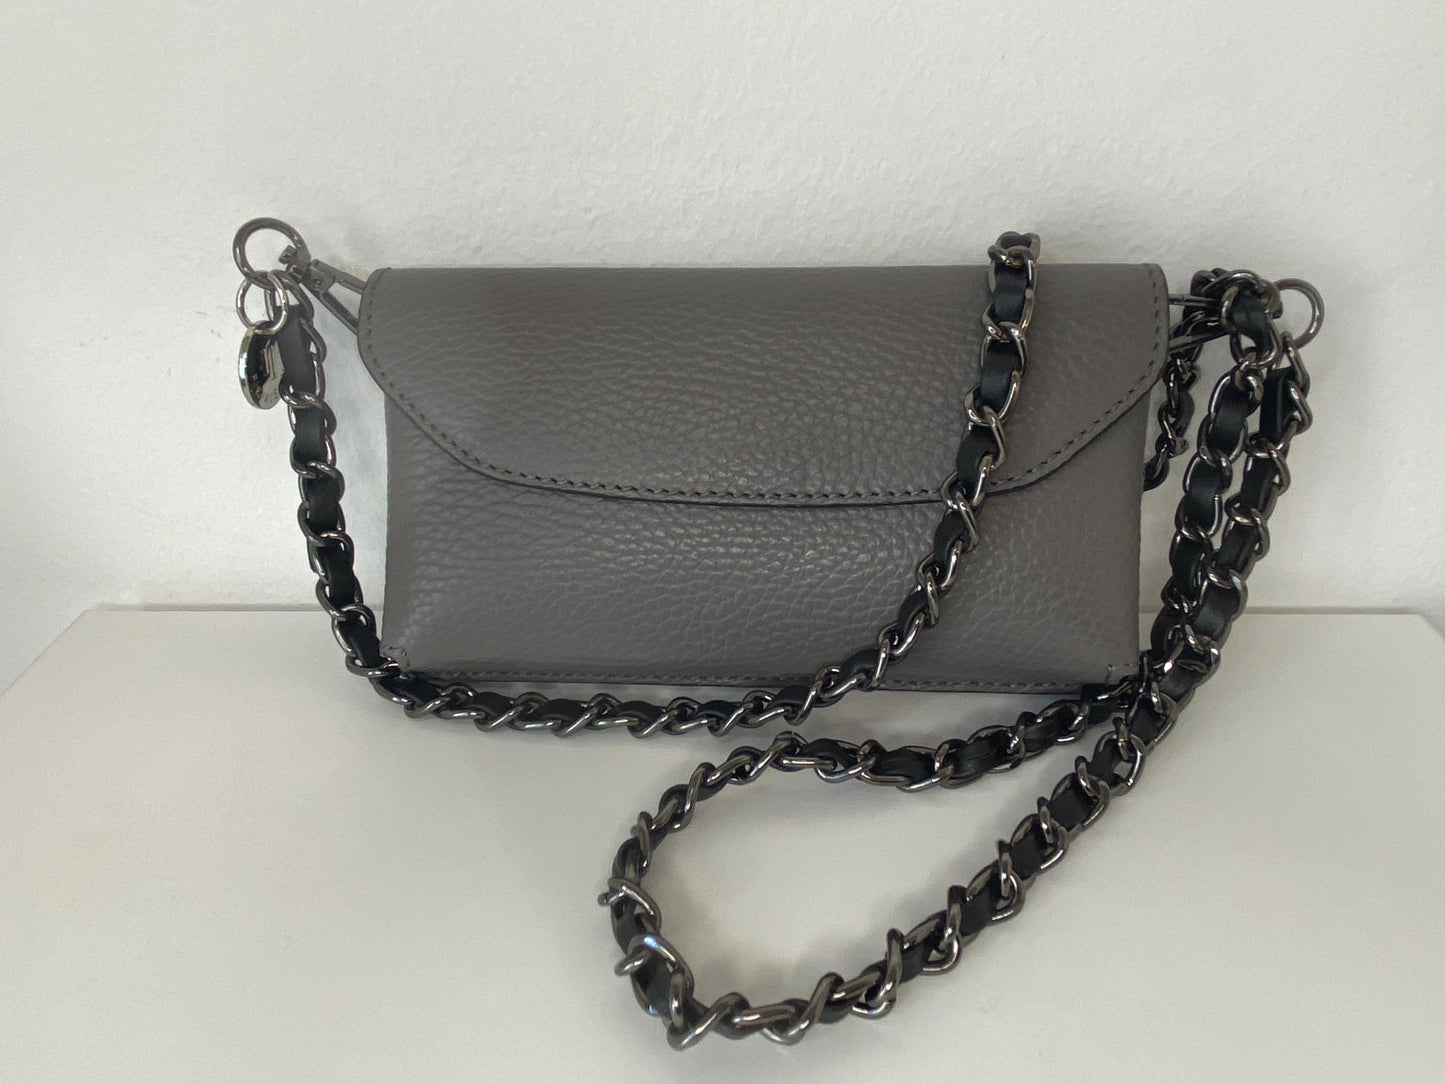 Mini Mobile Bag with Chanel Chain